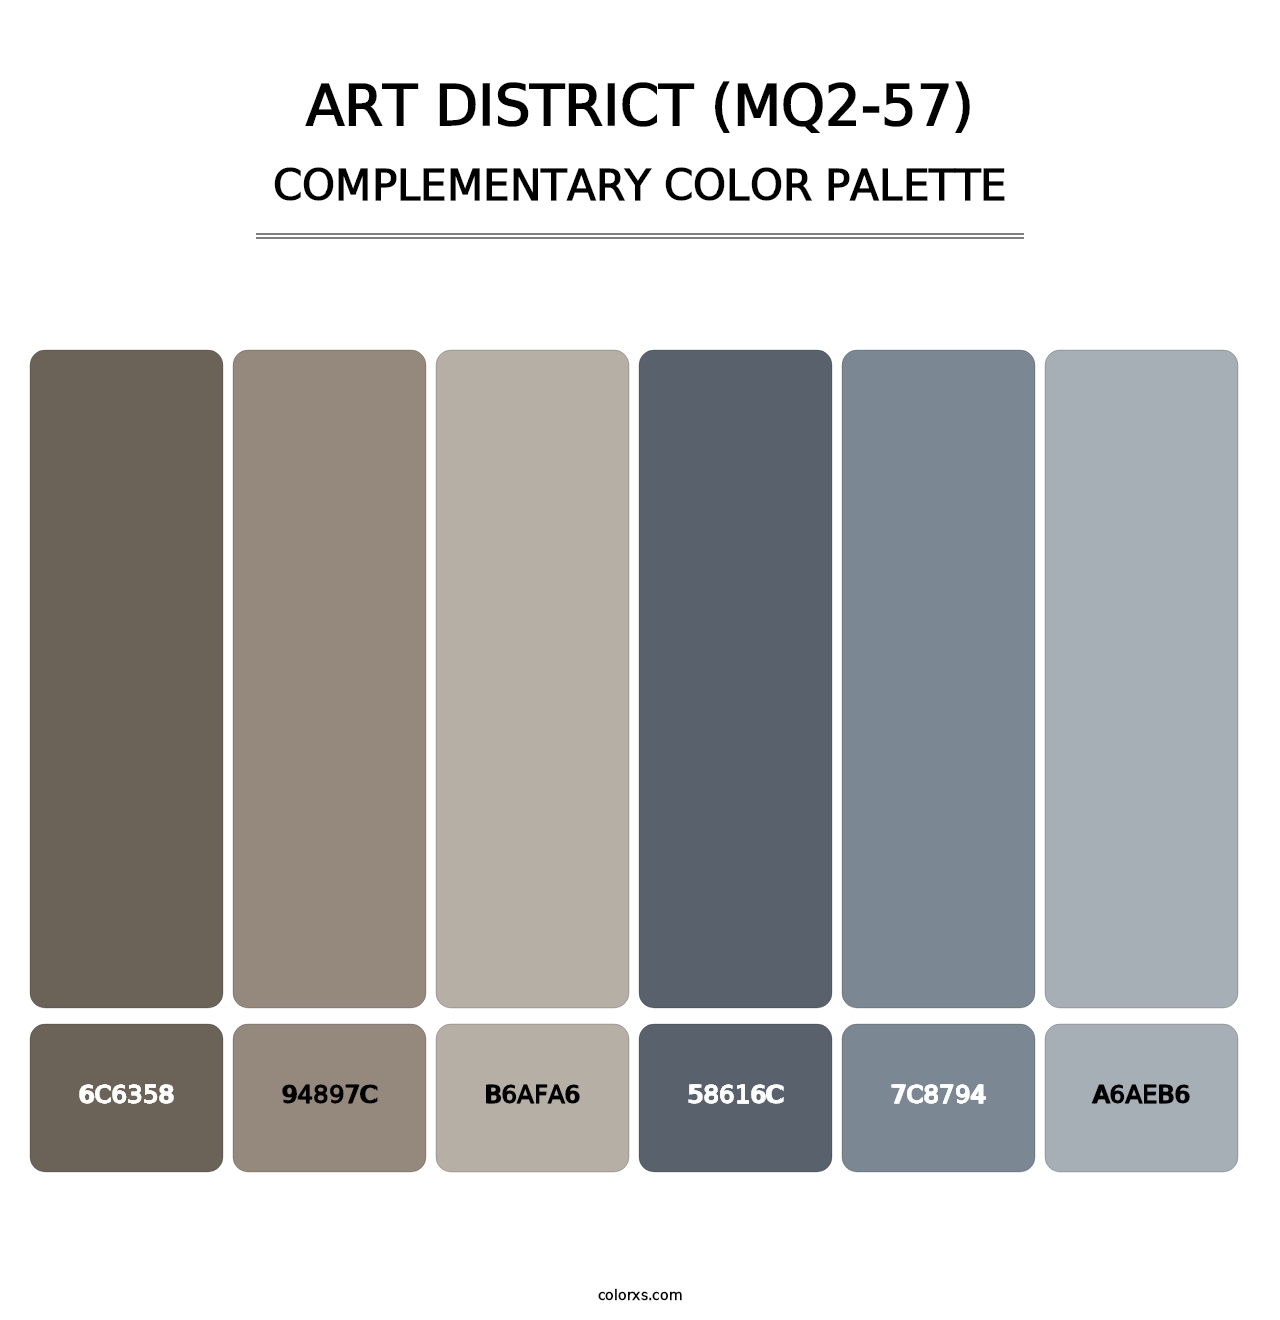 Art District (MQ2-57) - Complementary Color Palette